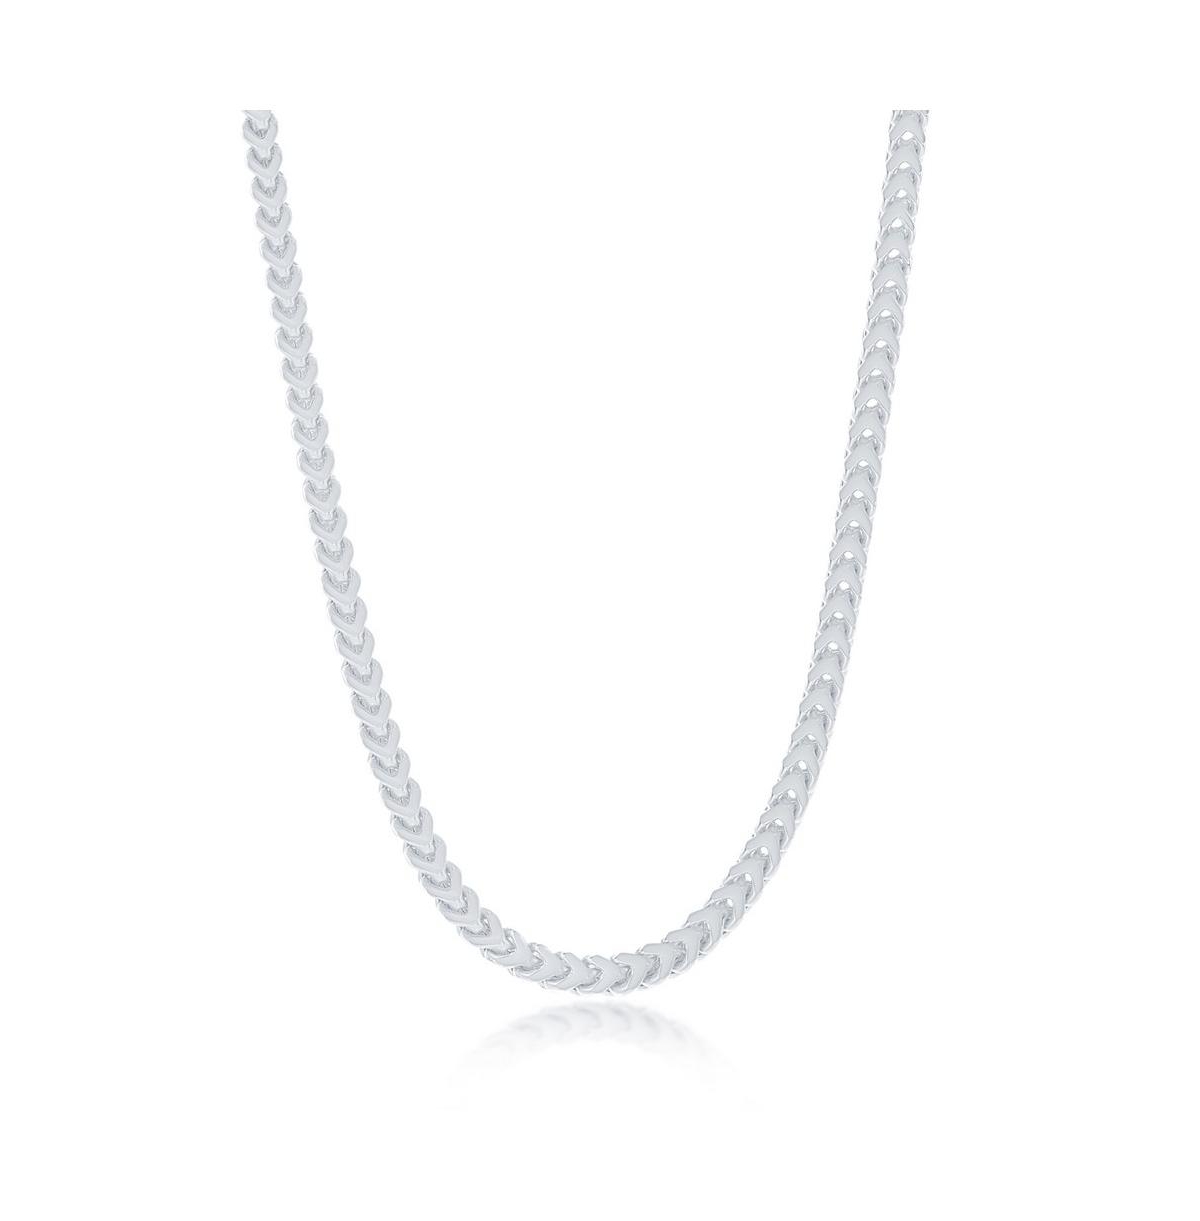 SIMONA FRANCO CHAIN 3MM STERLING SILVER OR GOLD PLATED OVER STERLING SILVER 22" NECKLACE